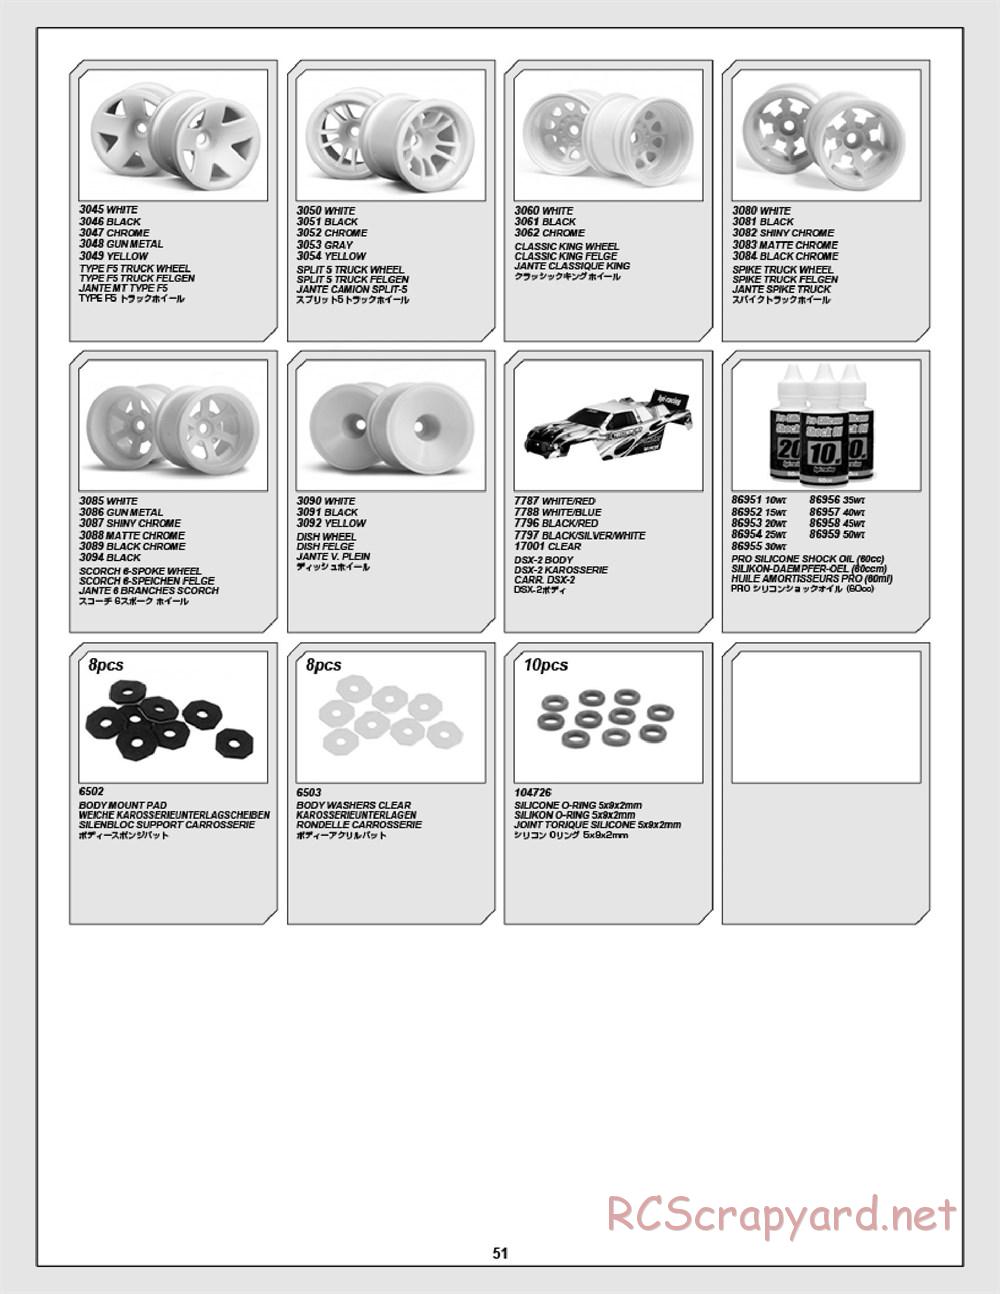 HPI - E-Firestorm 10T Flux - Exploded View - Page 51